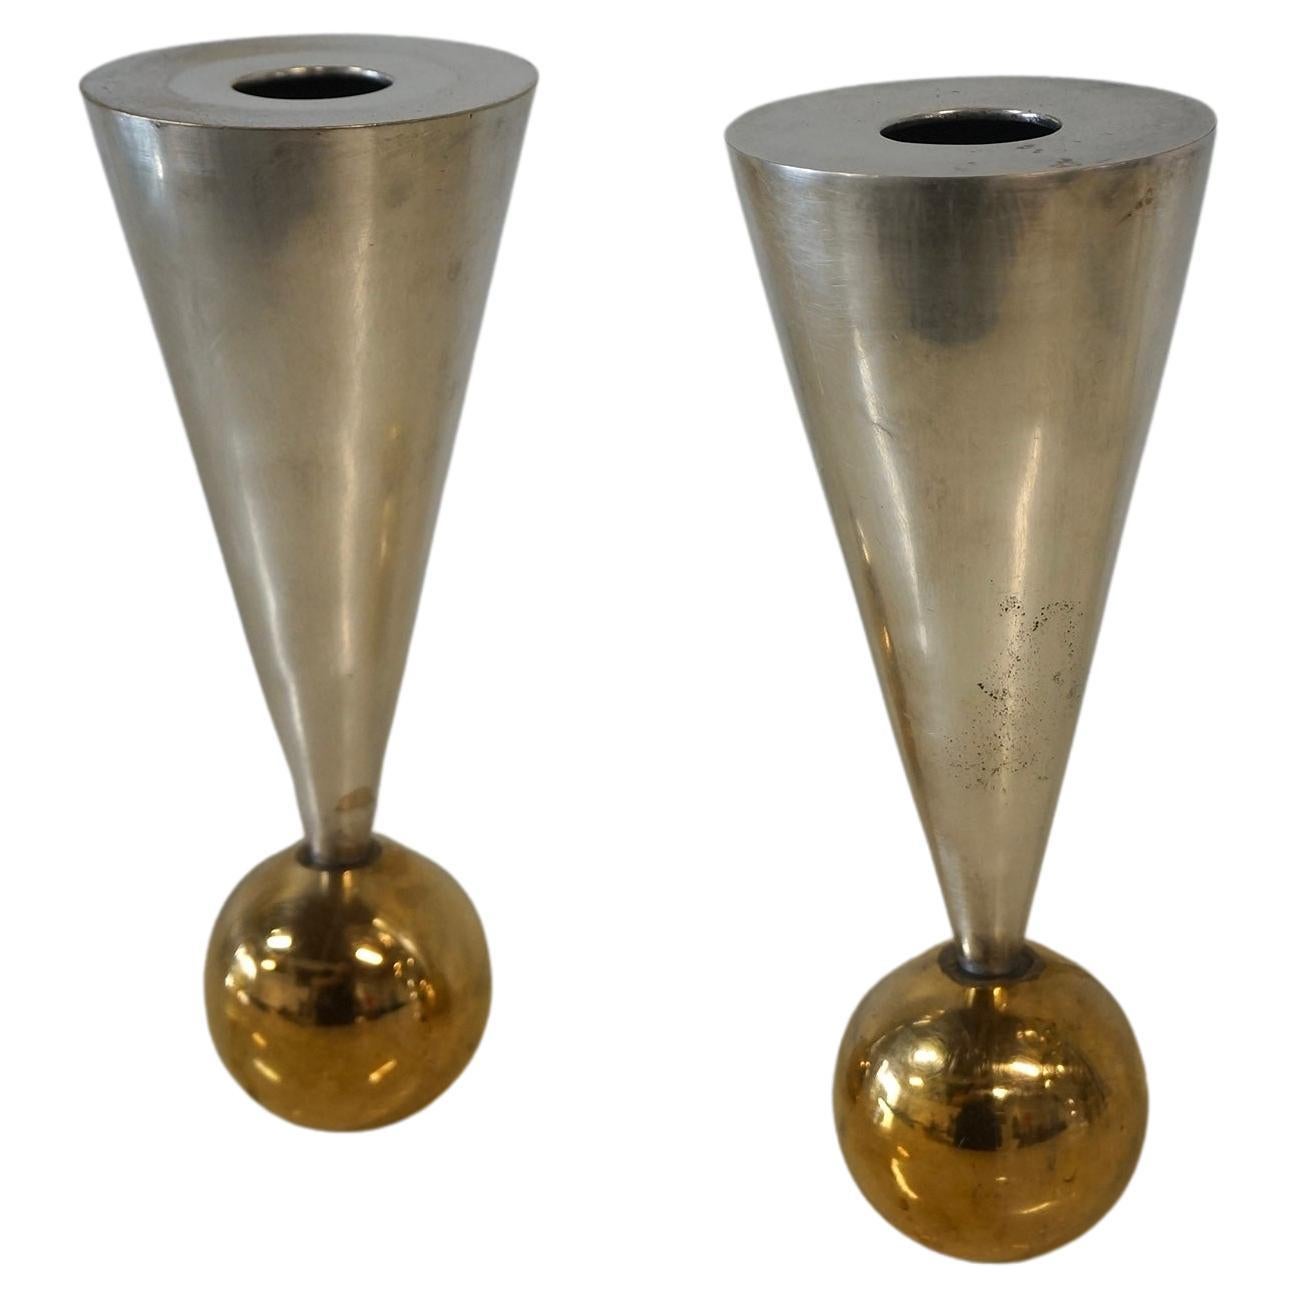 Striking Geometric Sculptural Postmodern Candle Holders in Silver and Brass Plated made in the 1980s. The silver body of the candle holder is triangular and it has a round brass plated ball shaped base. There’s an opening at the top for placement of